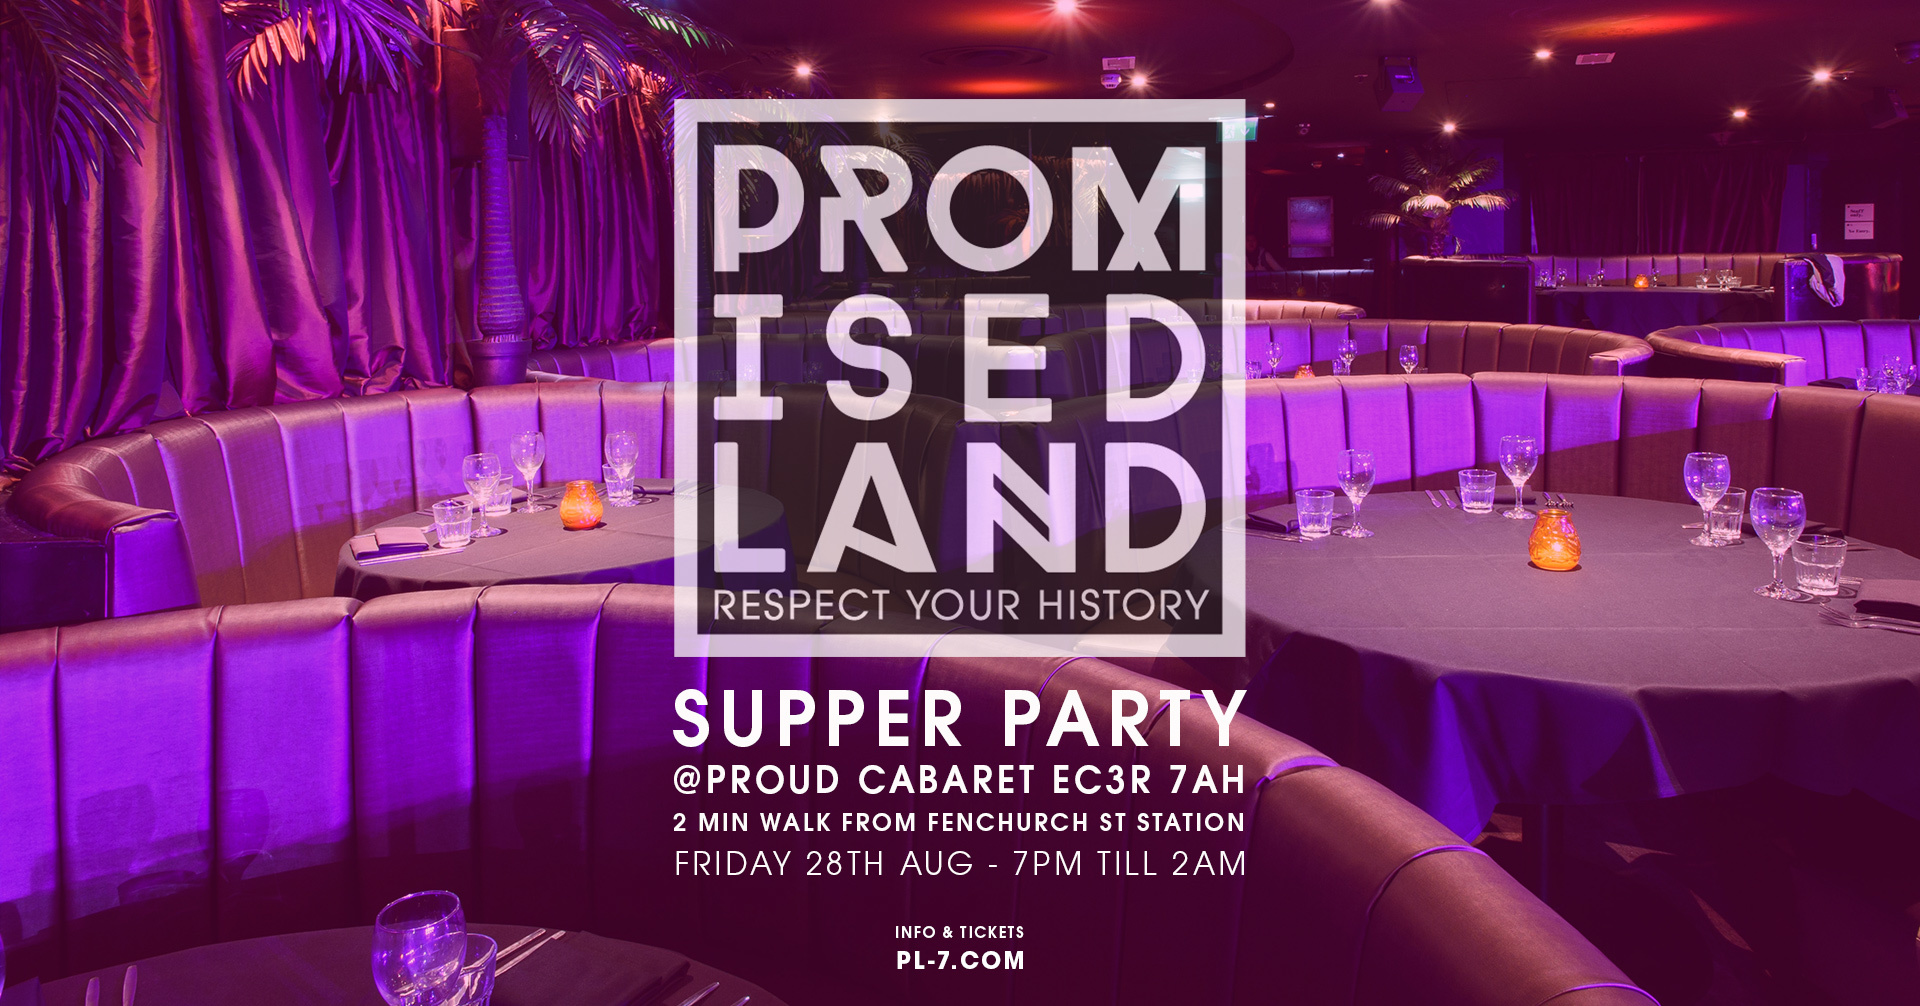 Promised Land Supper party with Terry Farley, London, United Kingdom